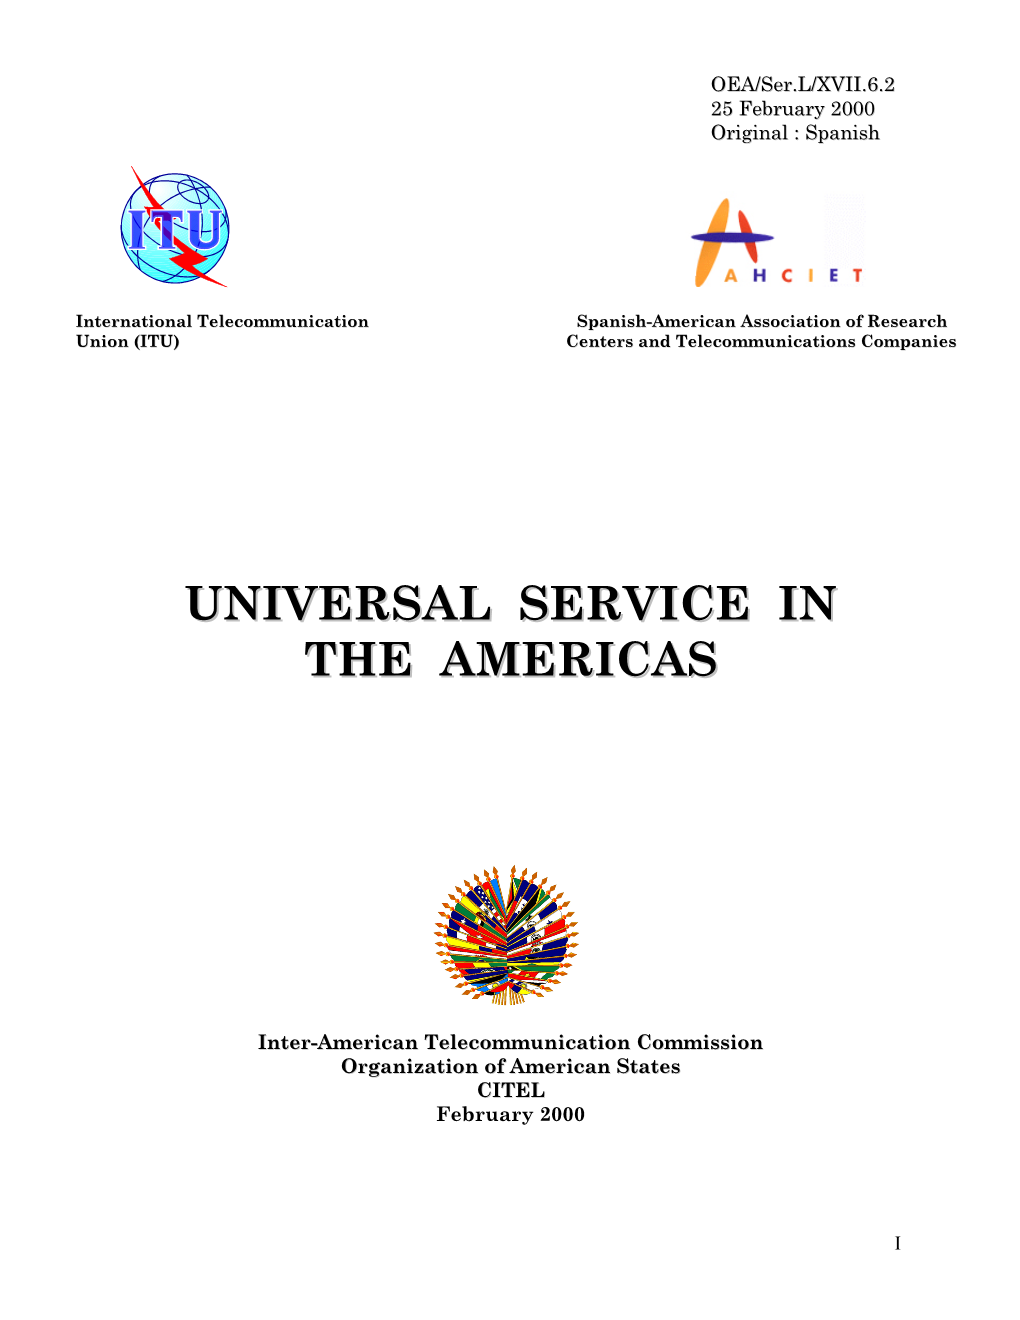 Universal Service in the Americas